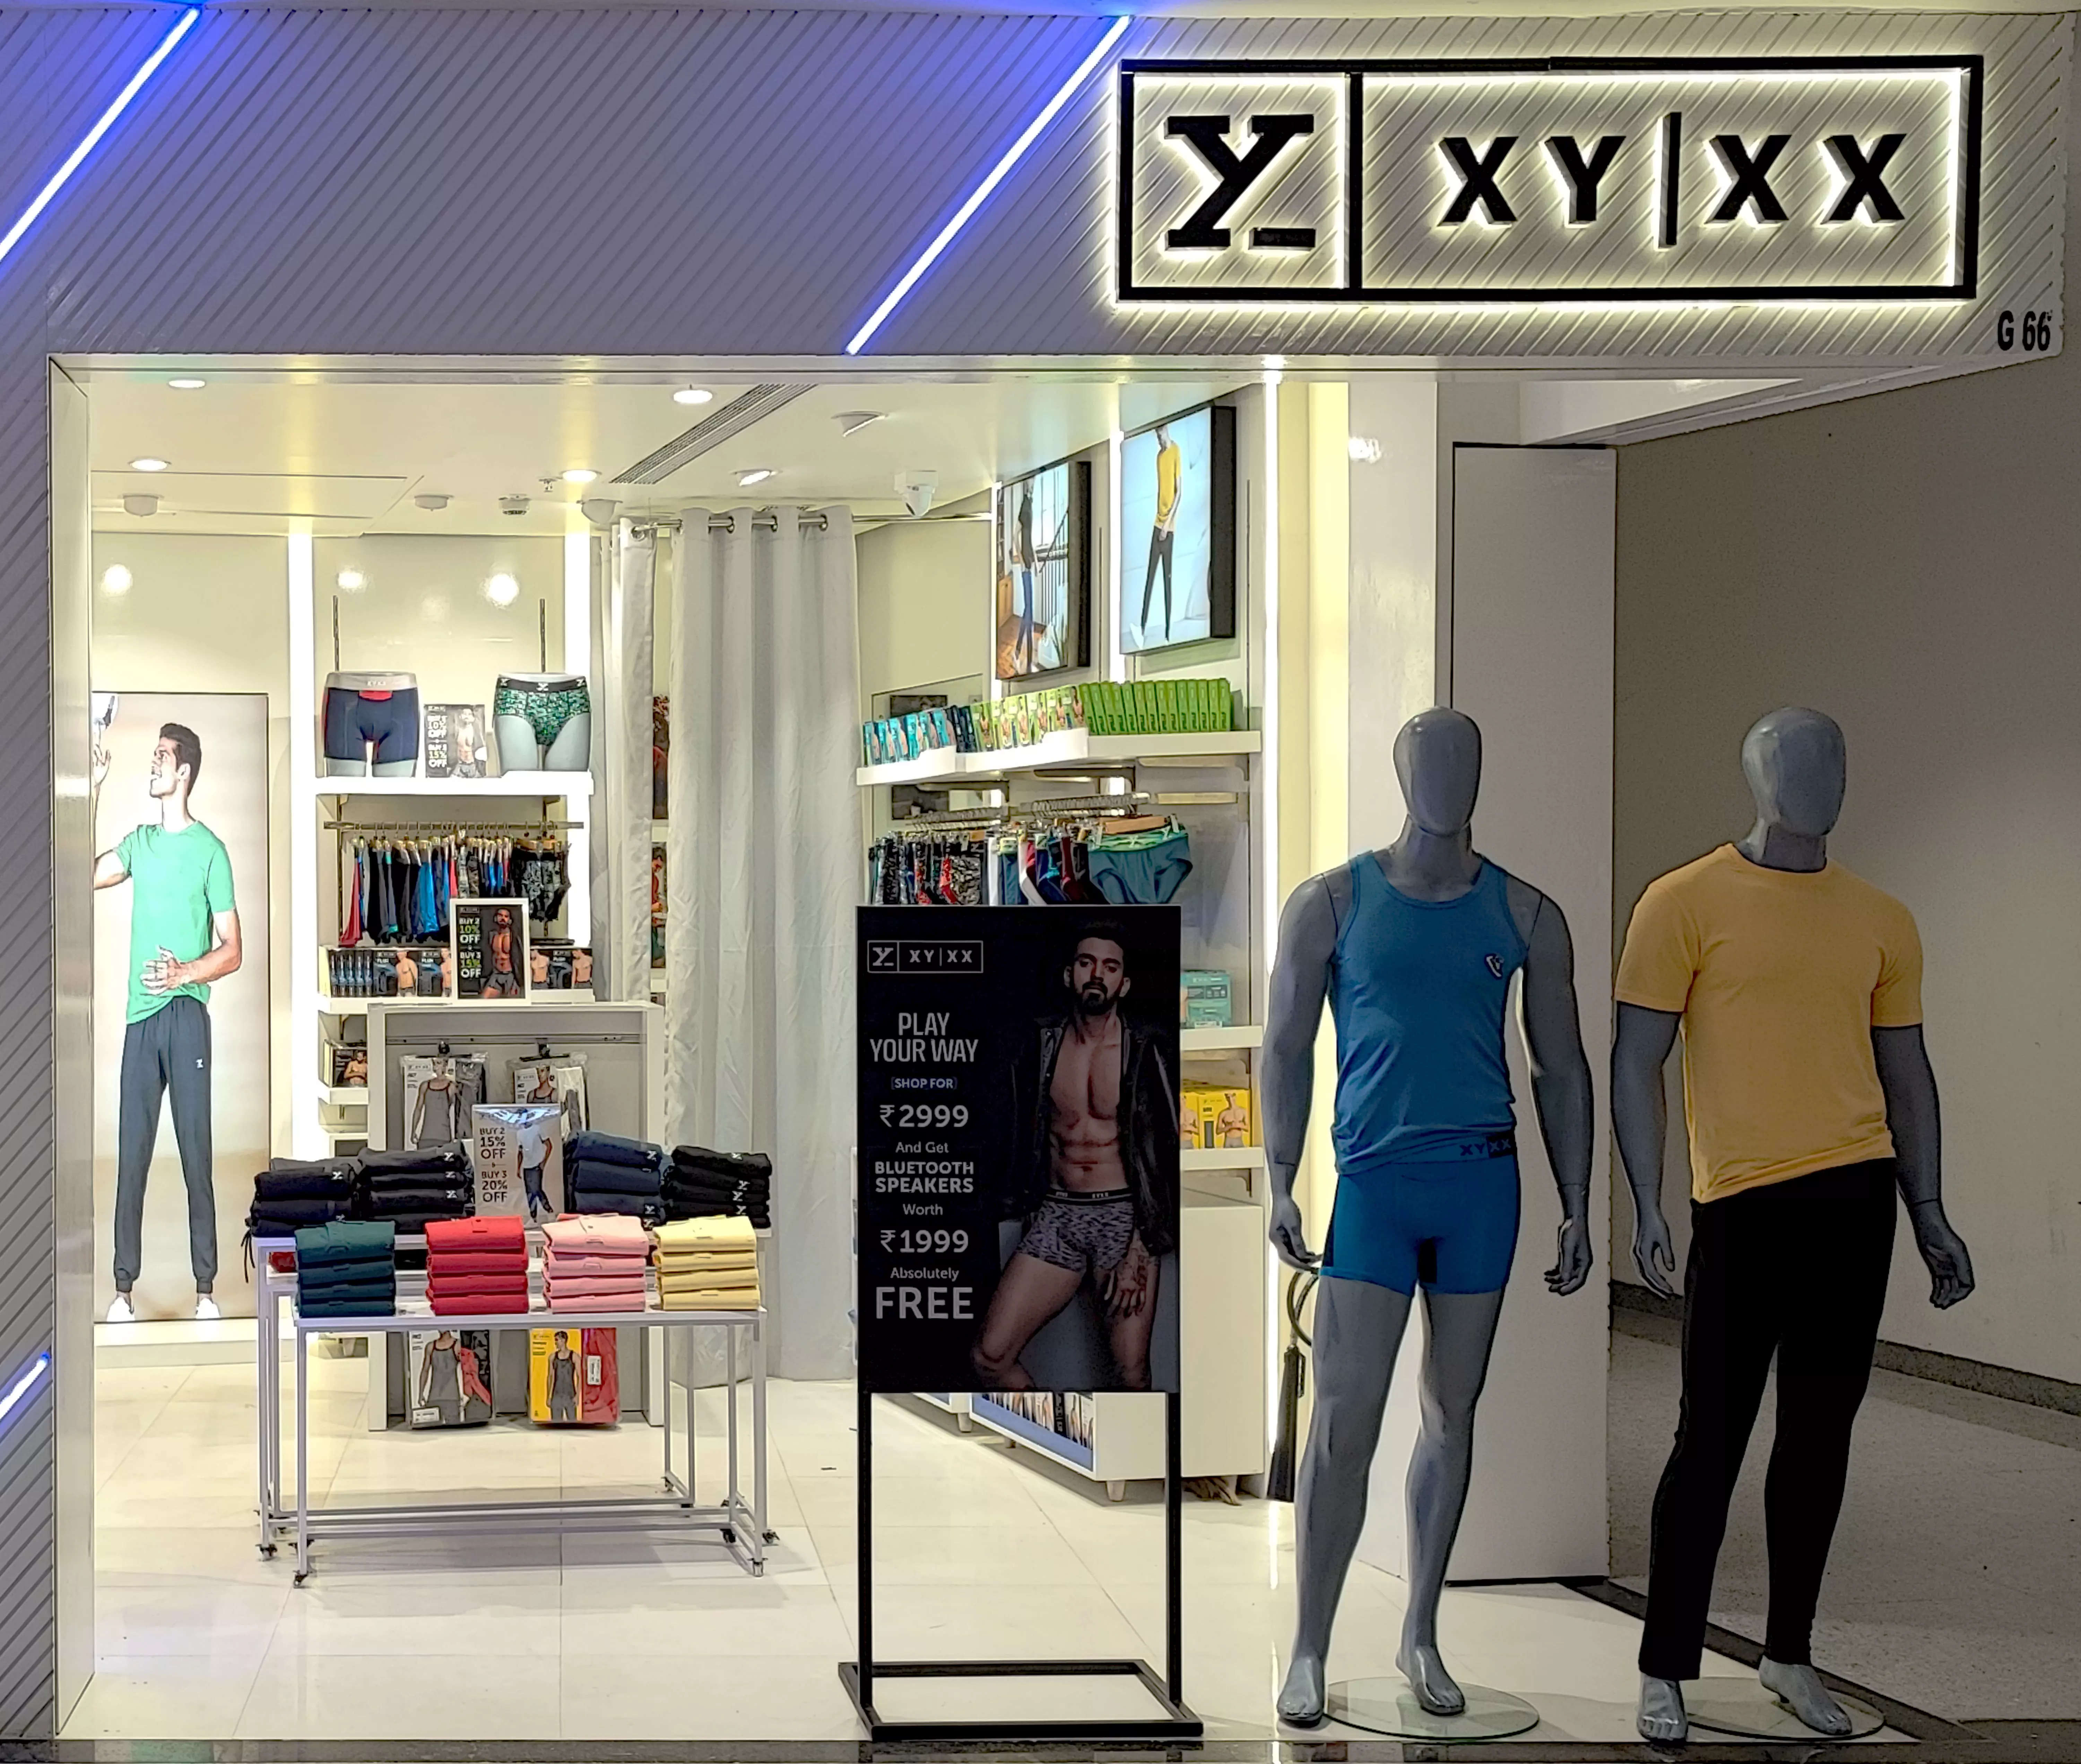 Men's lingerie brand XYXX sets a revenue target of Rs 240 billion this financial year as it strengthens its offline presence